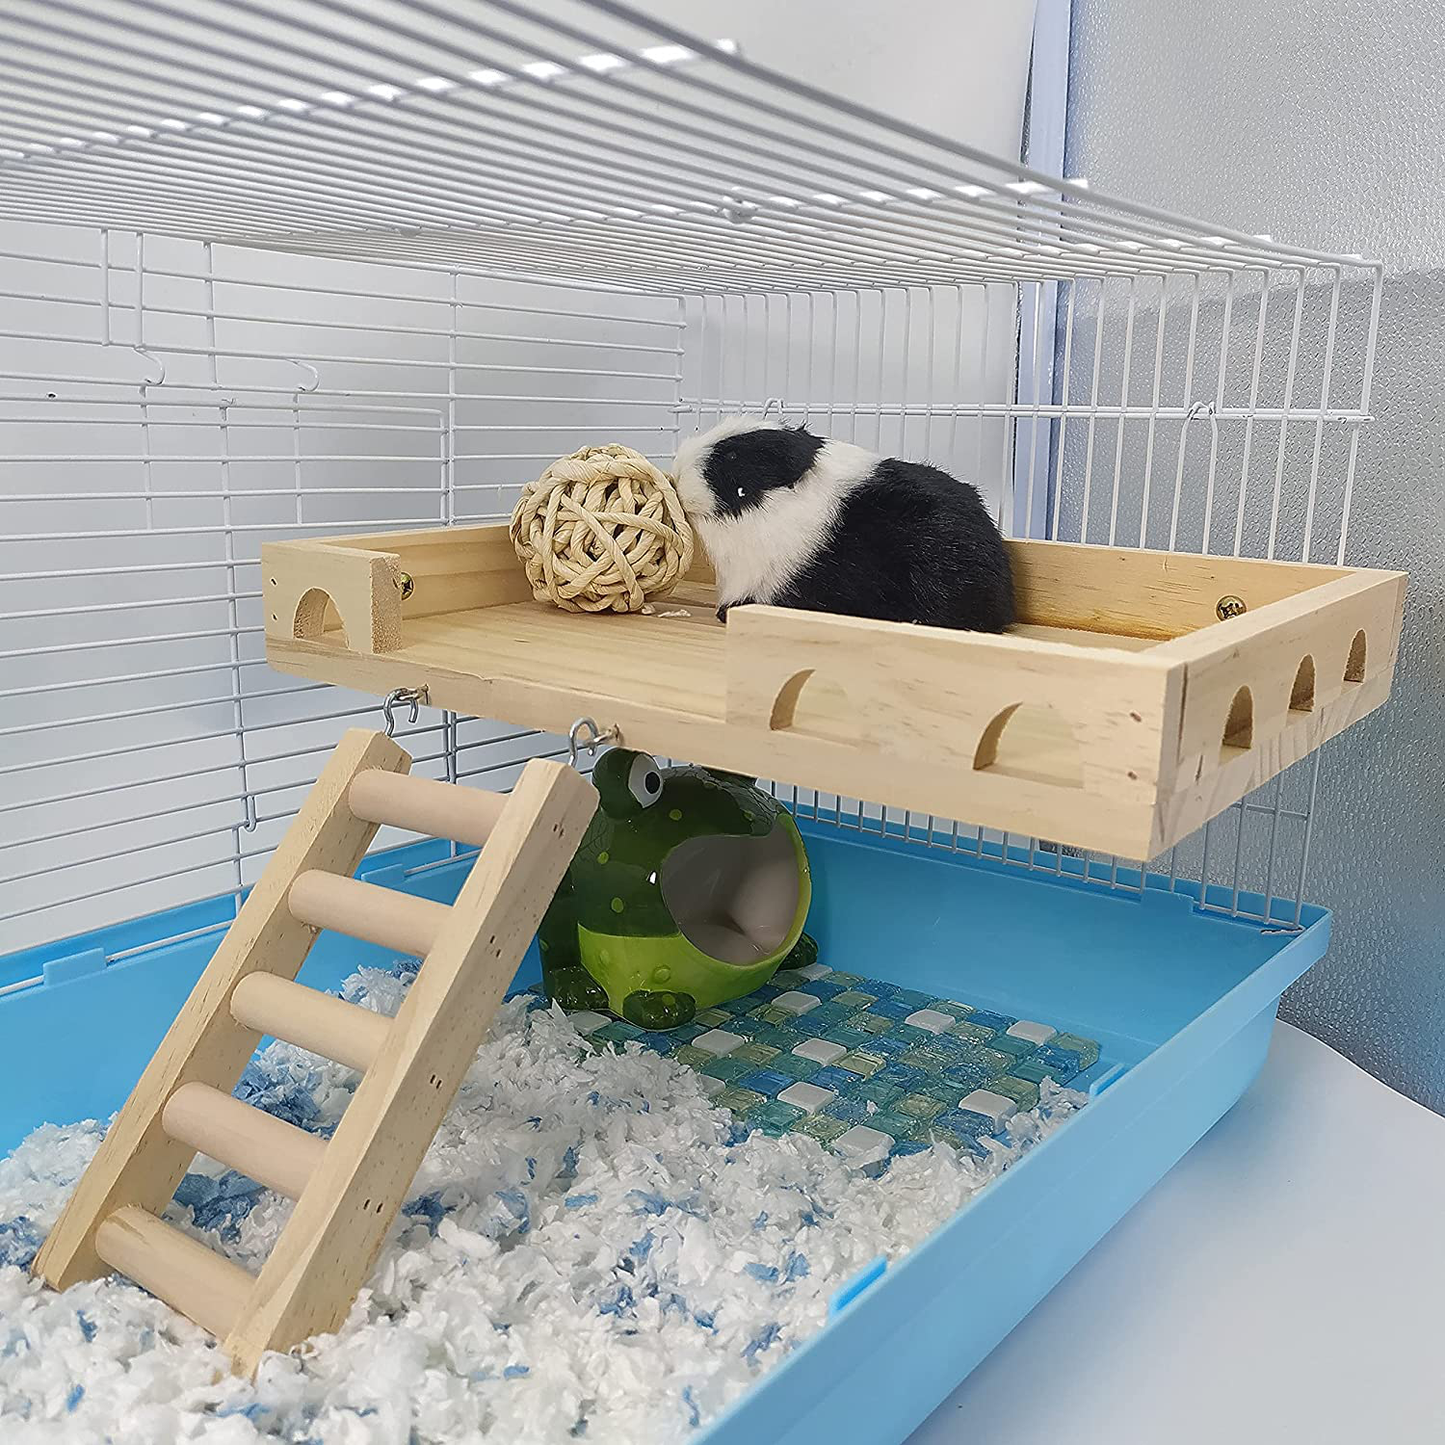 RABBITP Wood Bird Perch-Toys and Accessories for Parrot, Parakeet, Syrian Hamster, Ferret, Chinchilla, Guinea Pig-Hamster Play Stand Platform with Ladder…